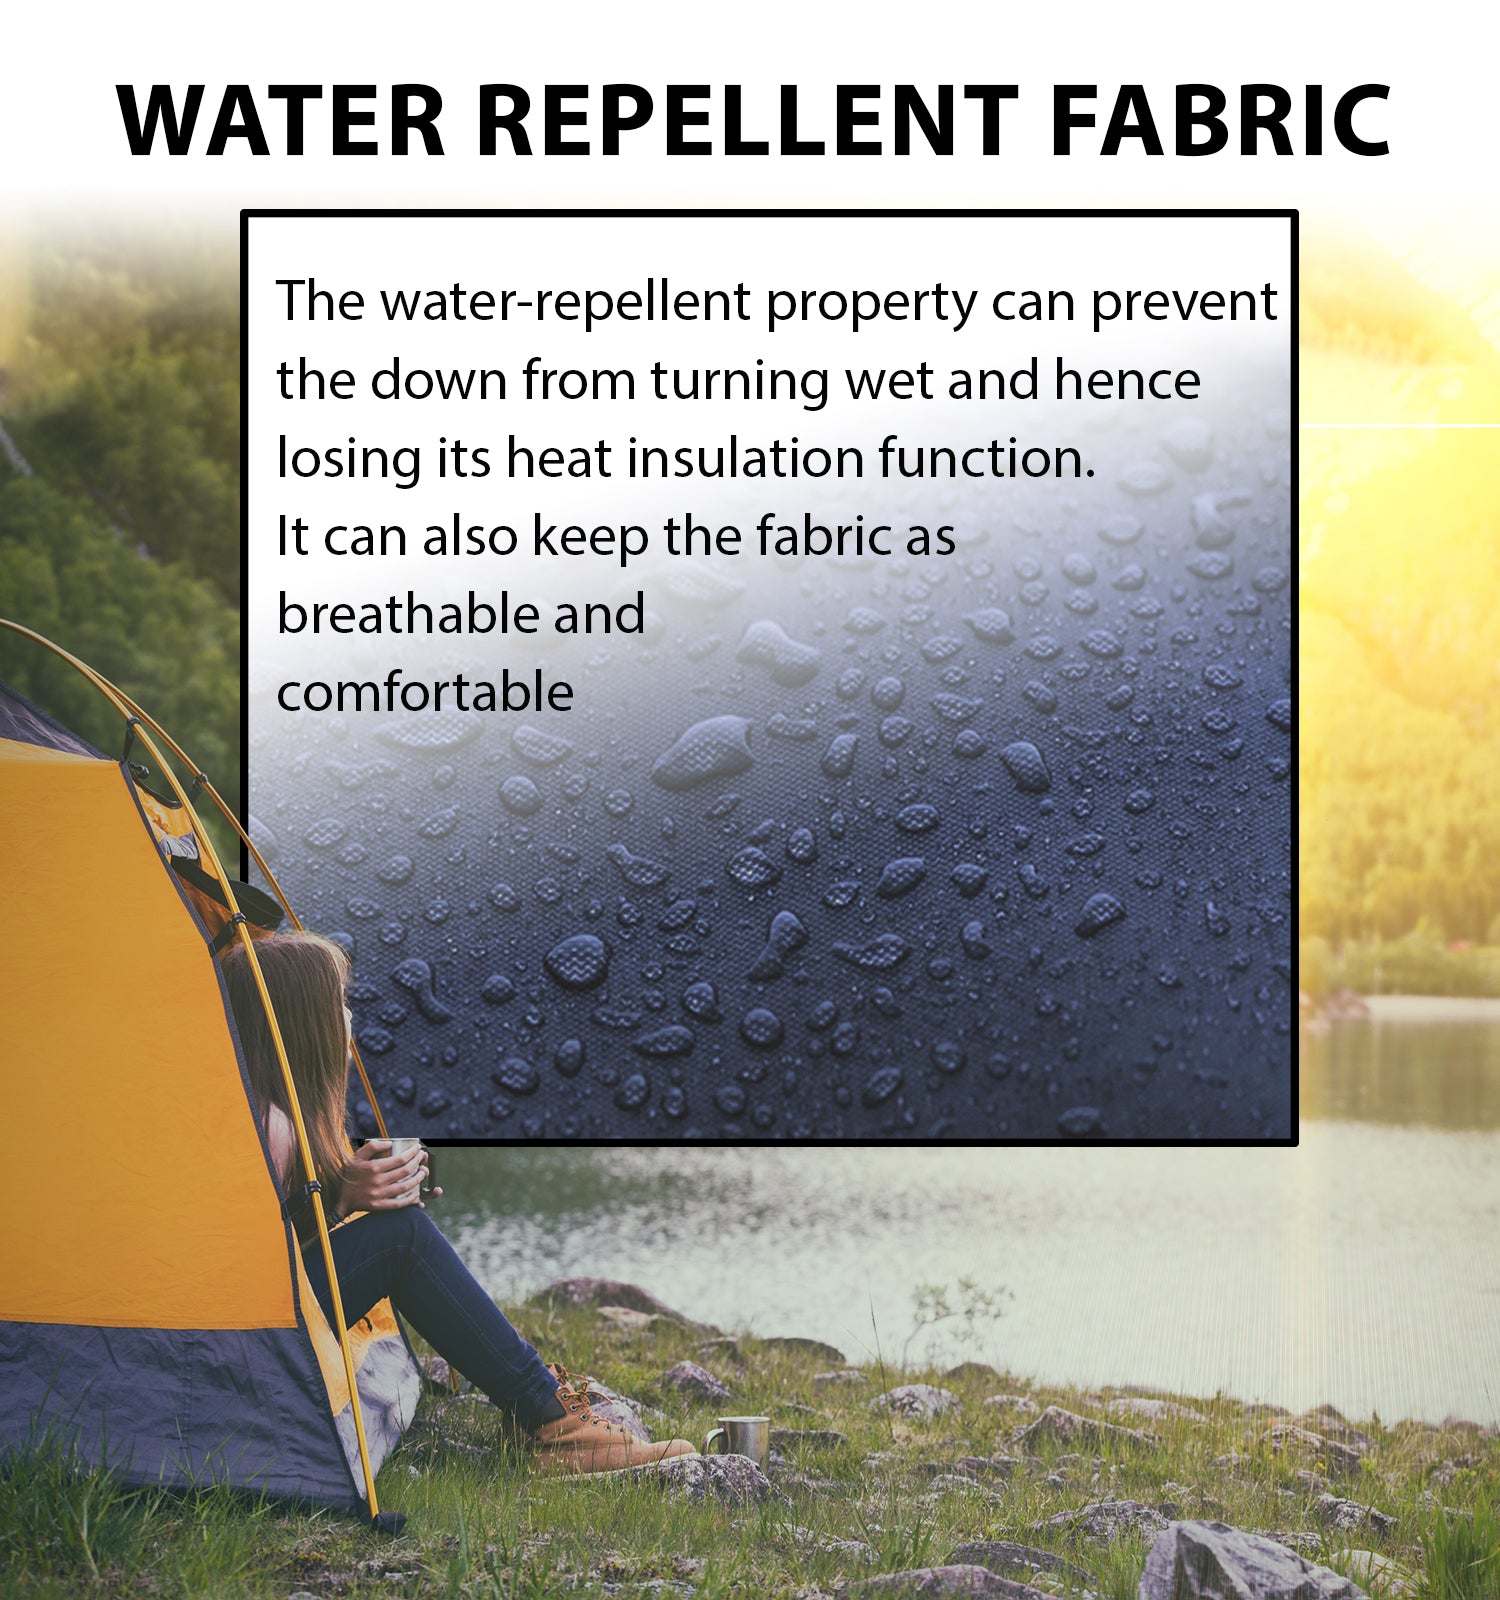 water repellent fabric waterproof insulation breathable comfotable soft sleeping bag insulation C2101 1.1 lbs 500g 700 Fill Power Down Ultra Air Mummy Sleeping Bag 43-68F 6-20C Litume small size ultra air lightweight compact packabale compressible backpacking hiking outdoor camping summer travel hostal train car auto road trip summer